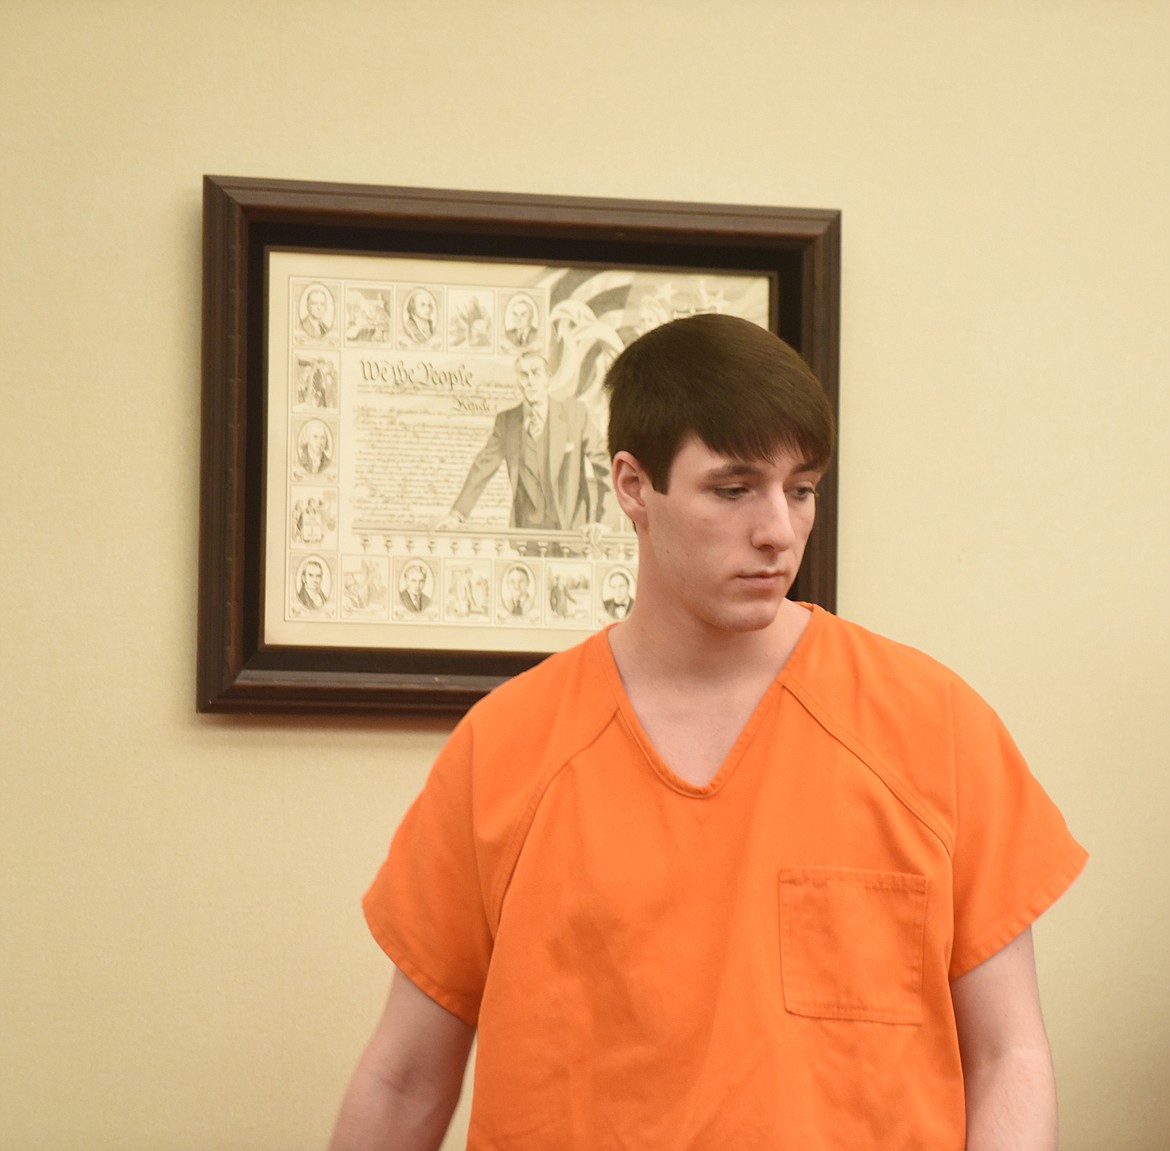 ANSEN WALTER Ingraham prepares to take a seat at the defense table prior to his change of plea hearing Thursday afternoon in Flathead District Court. Ingraham pleaded guilty to one count each of assault with a weapon and criminal endangerment for his involvement in a drive-by shooting Dec. 21, 2019. (Scott Shindledecker/Daily Inter Lake)